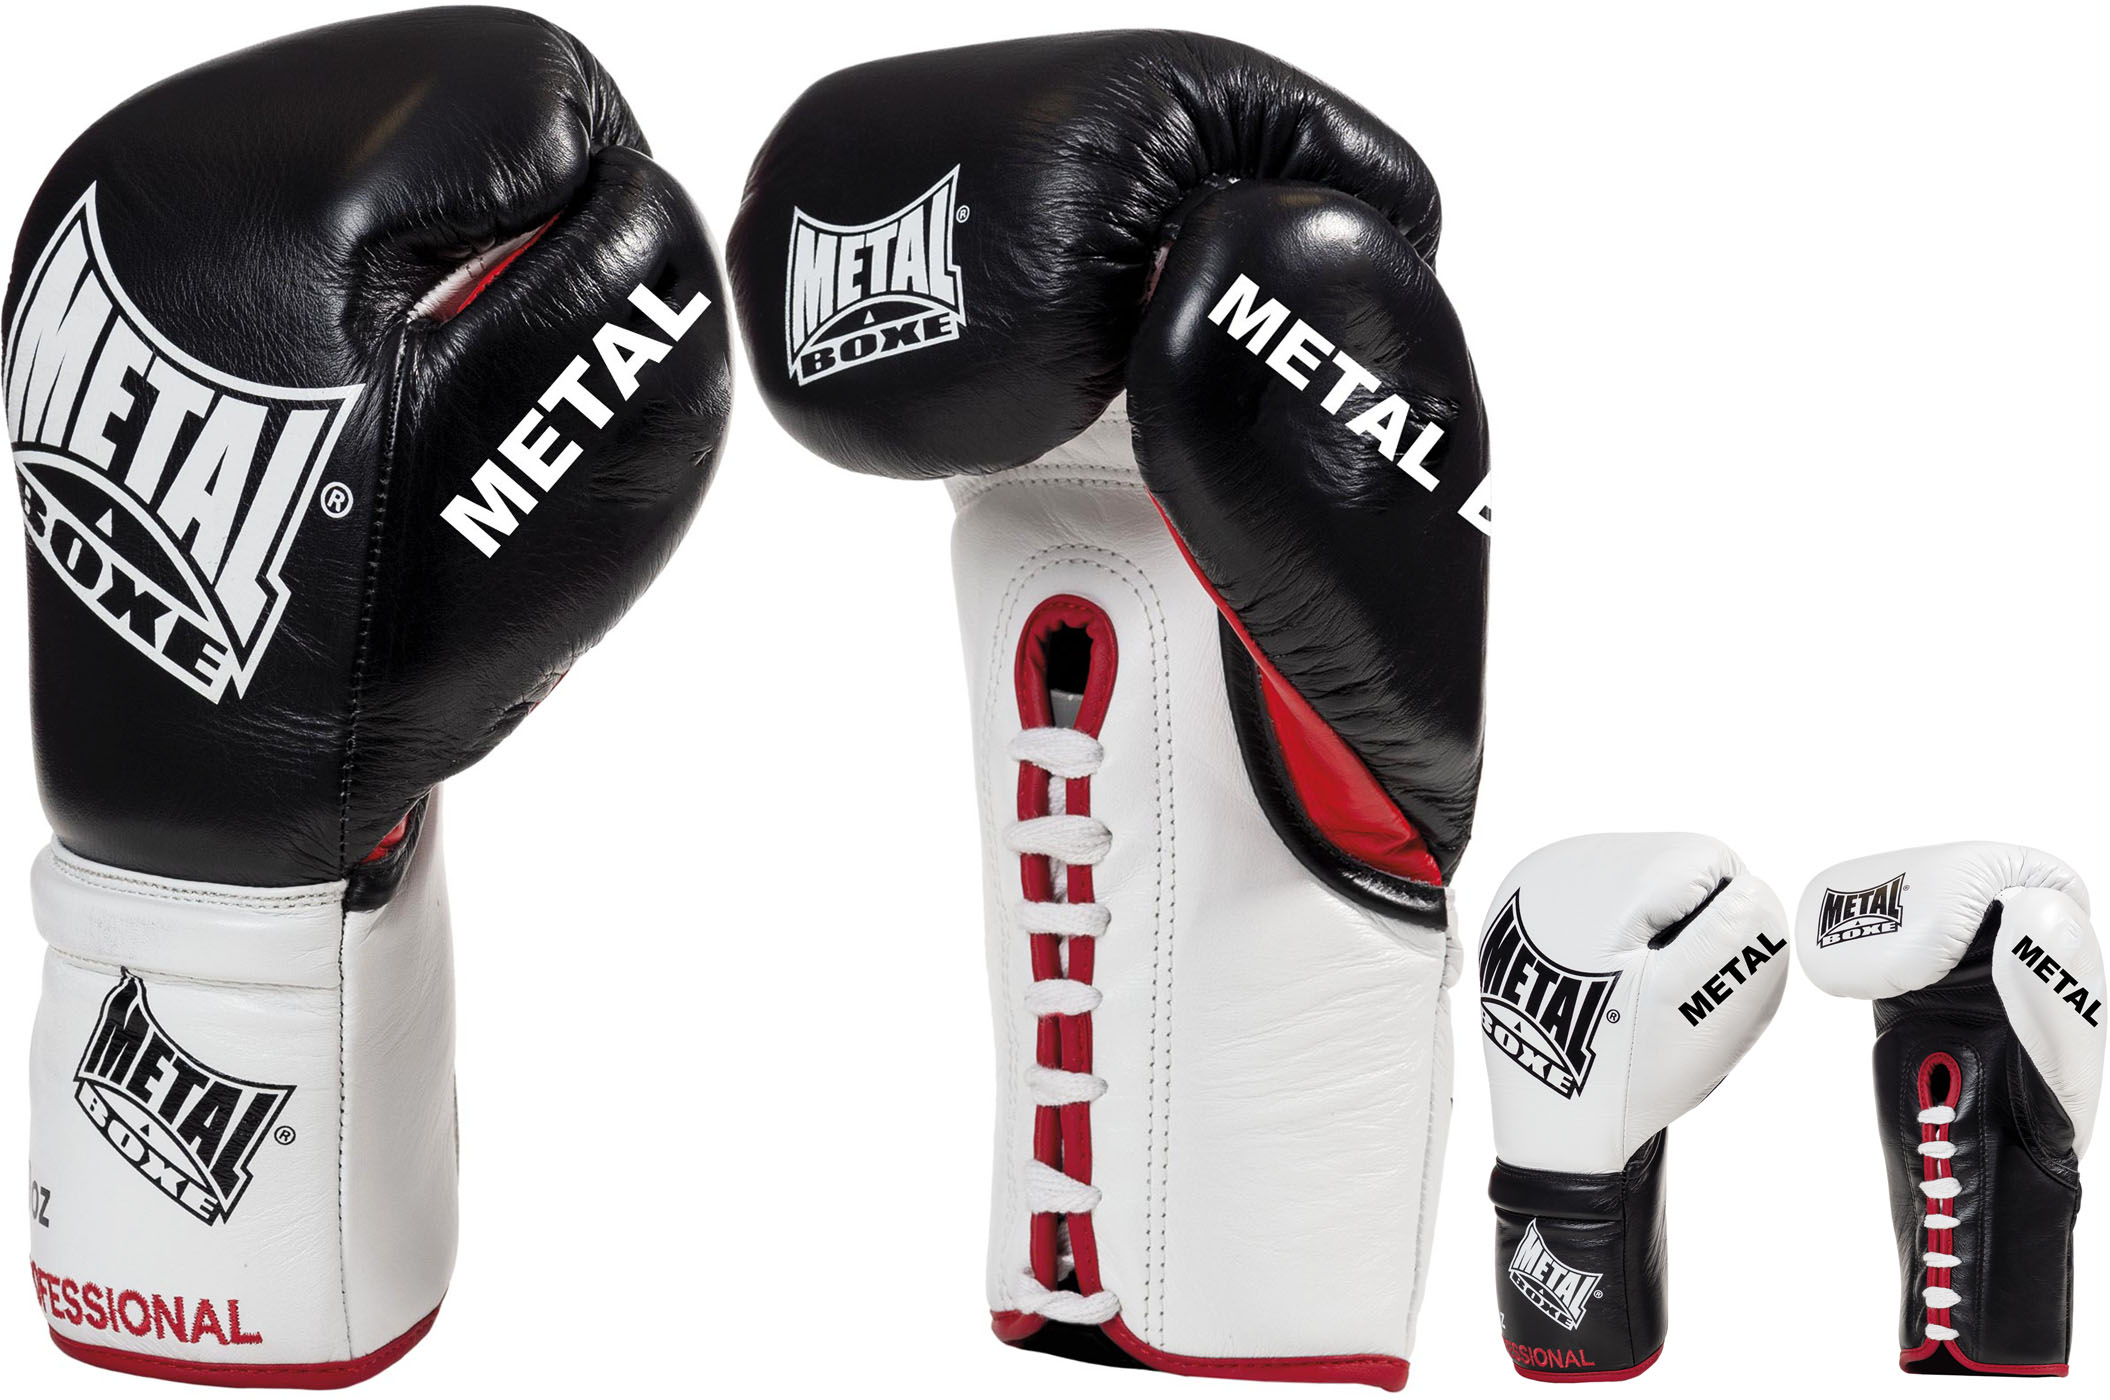  METAL BOXE MB213 Shield Unisex, Unisex, MB213,  Black/White/Red, Size M : Sports & Outdoors